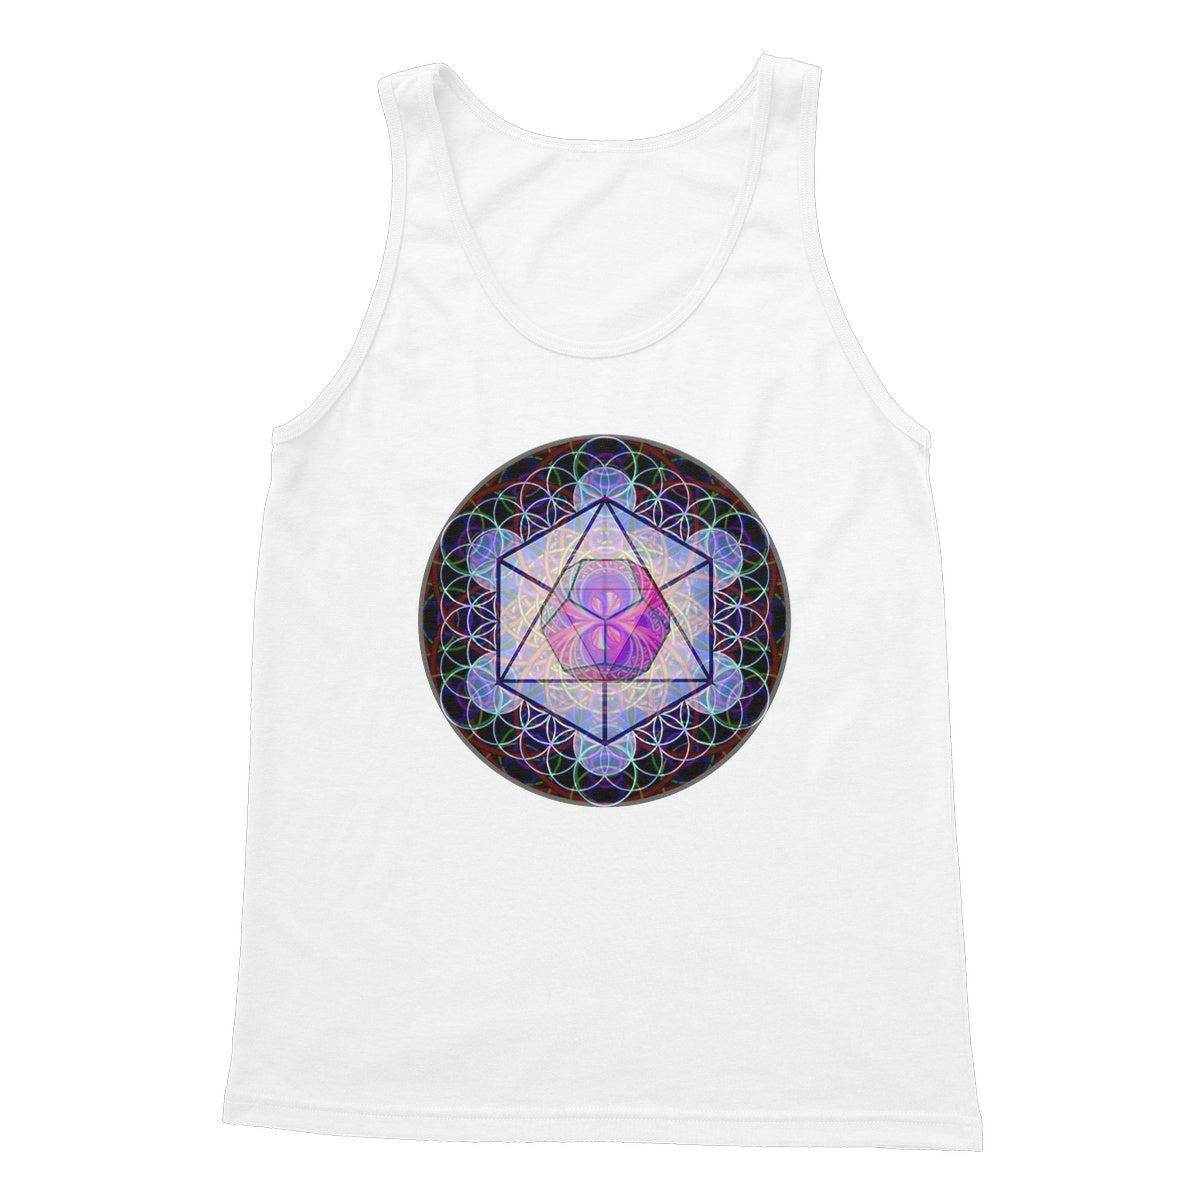 The Platonic Solid Dodecahedron Softstyle Tank Top